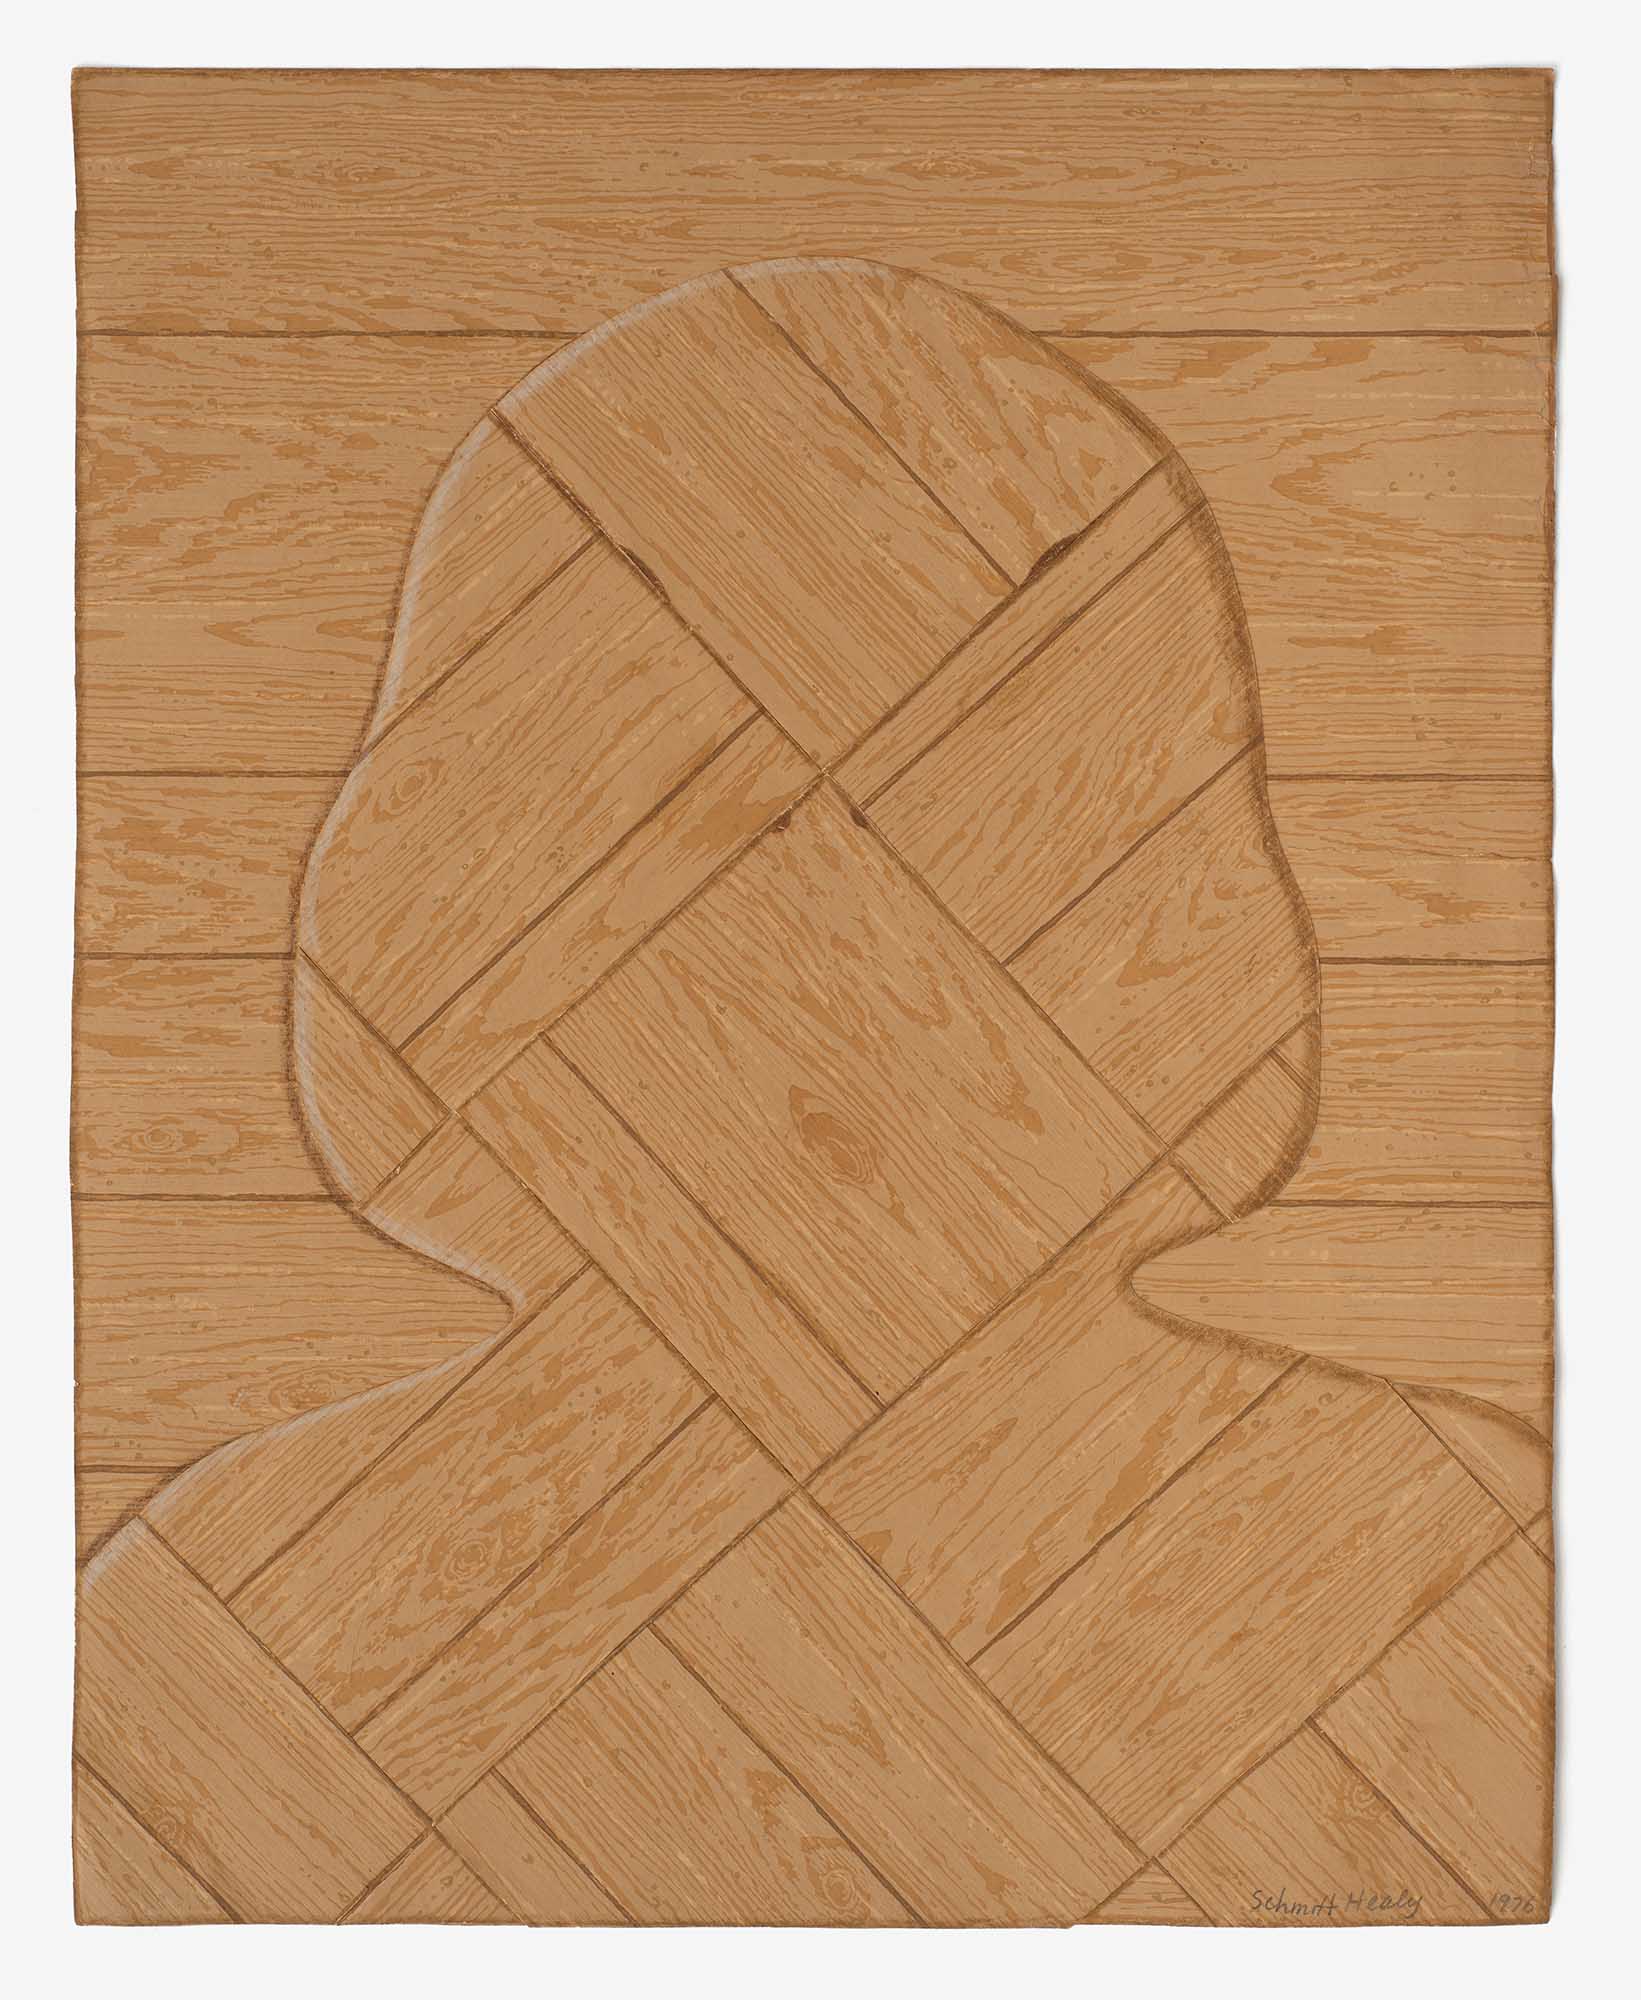 Parquet Lady 1976, Coloured pencil on collaged wallpaper, 19 7/8h x 15 3/4w in